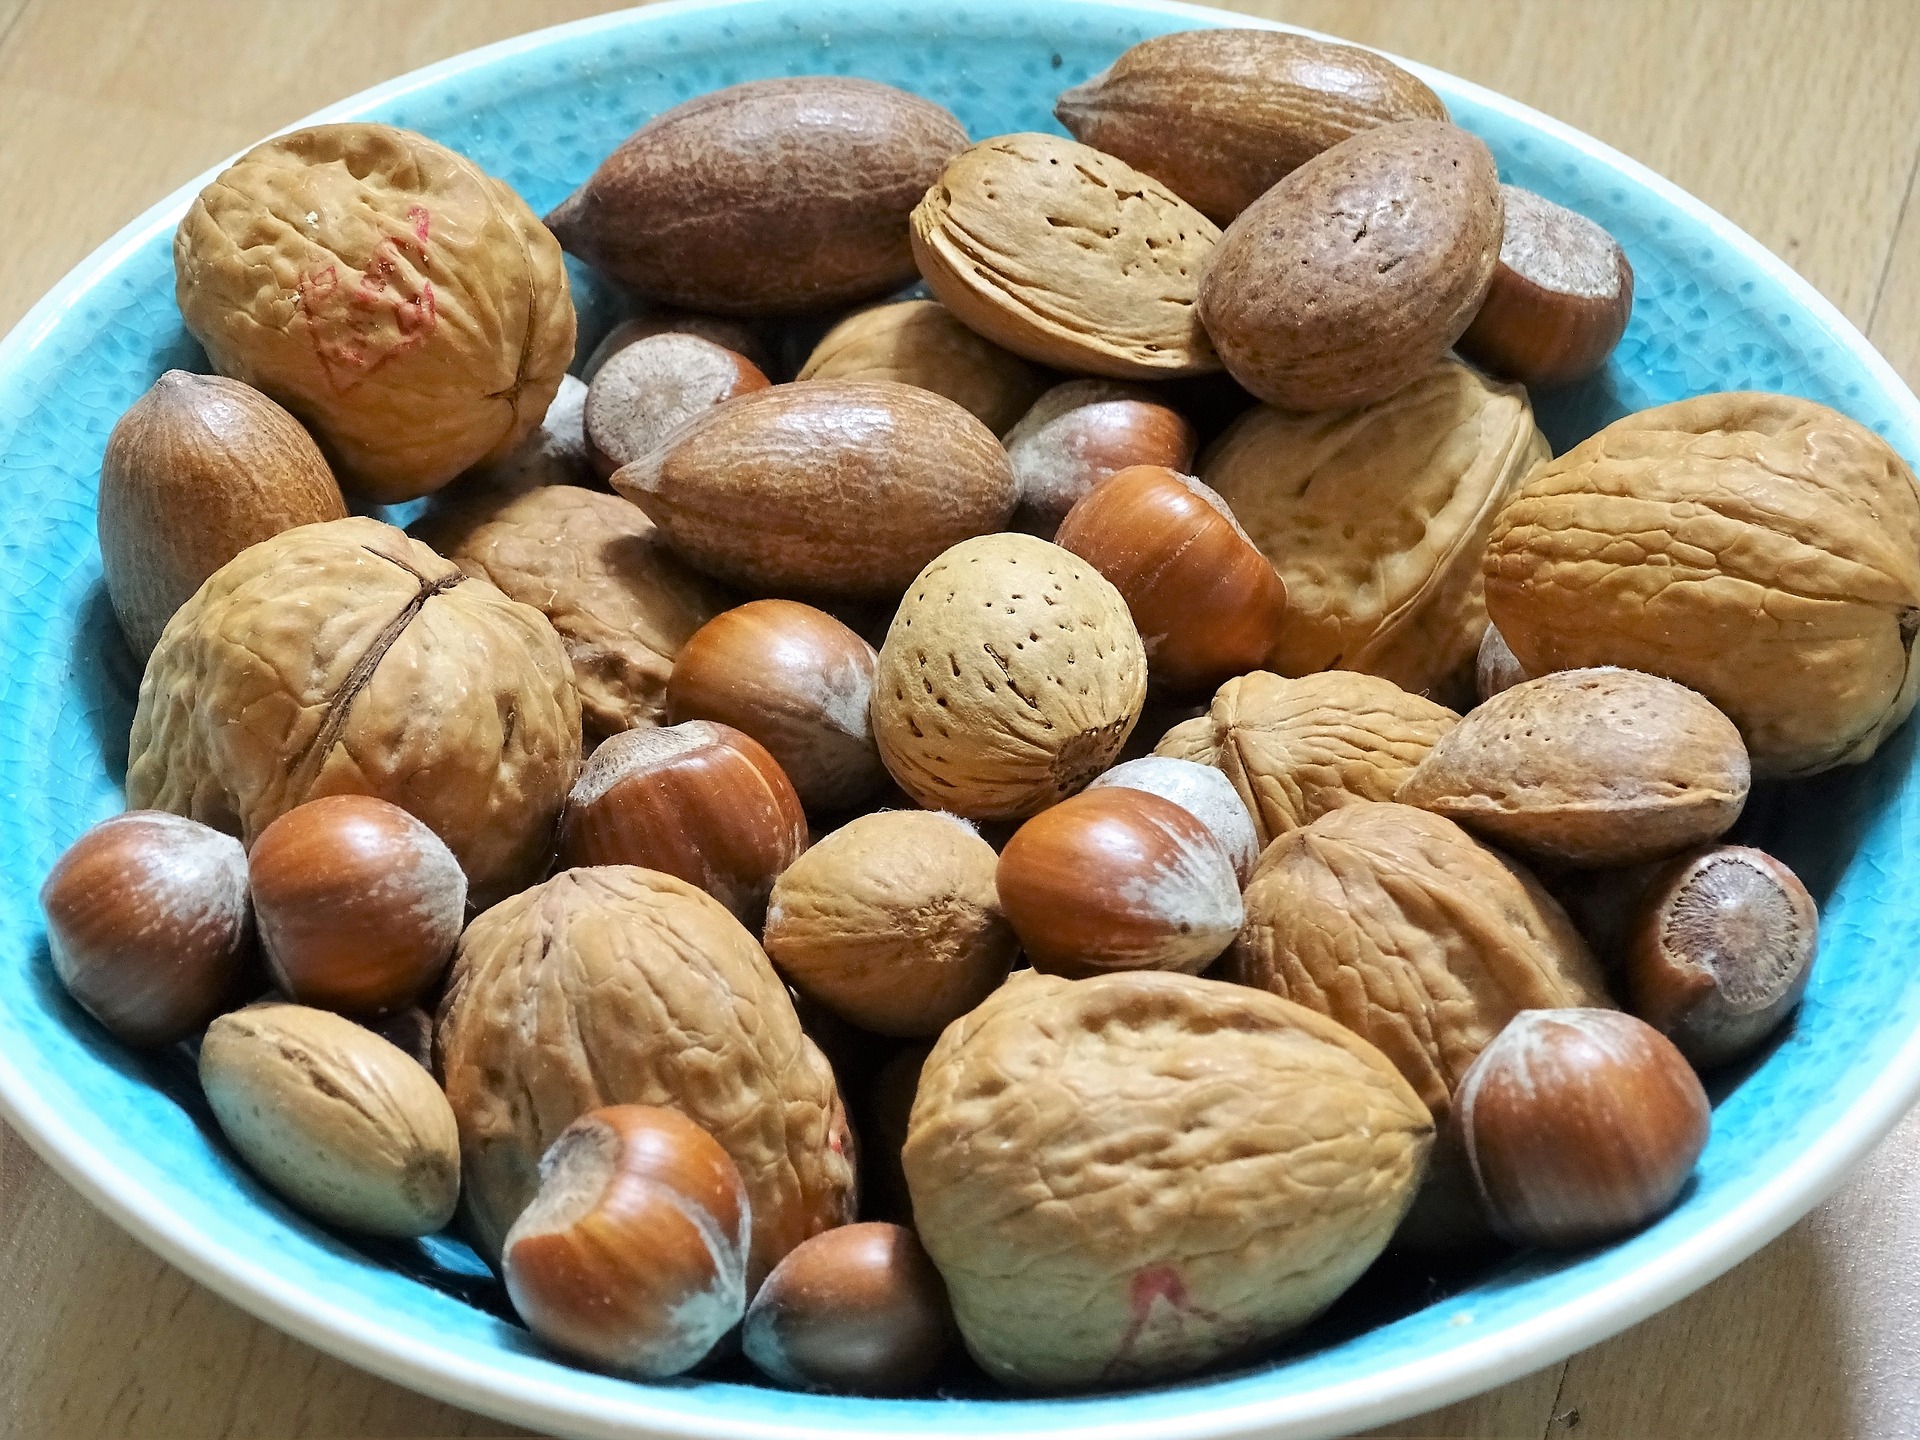 Types of Nuts: From Almonds to Walnuts and Their Health Benefits